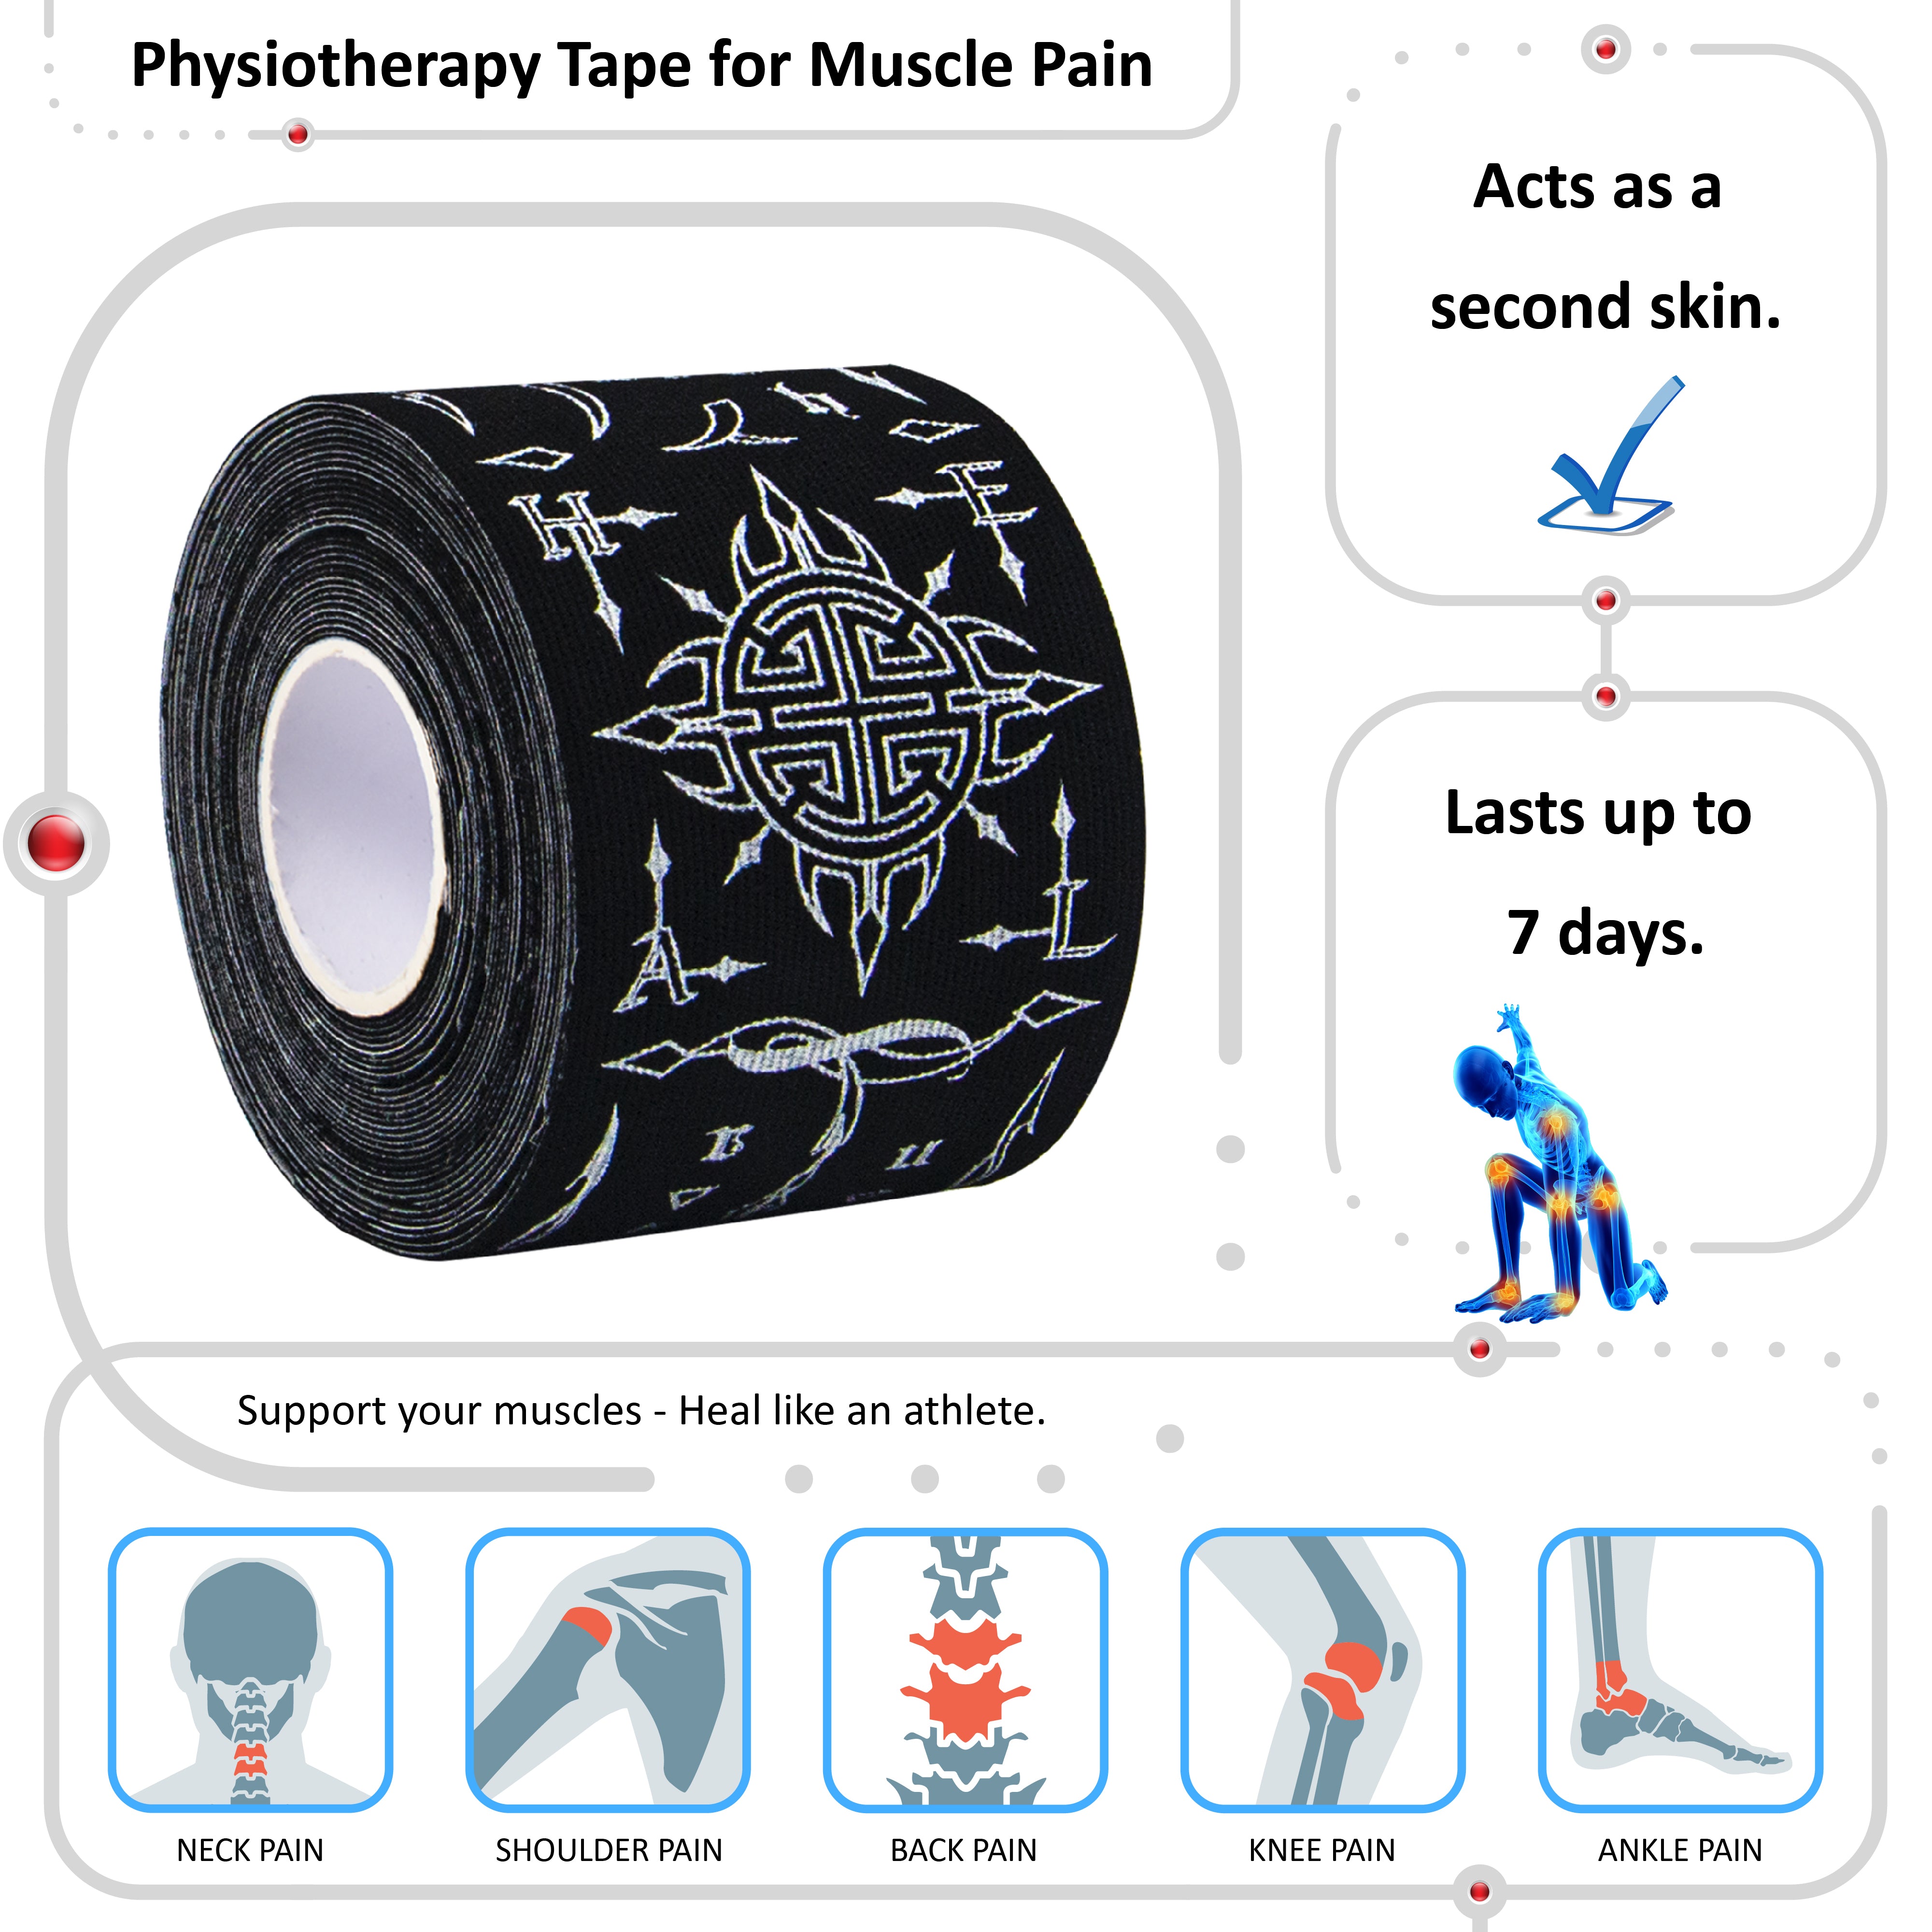 Black Kinesiology Tape Pre Cut with Dispenser - Talisman - Fengshui - Vertical Design - Athletic Sports Tape - For Healing and Recovery